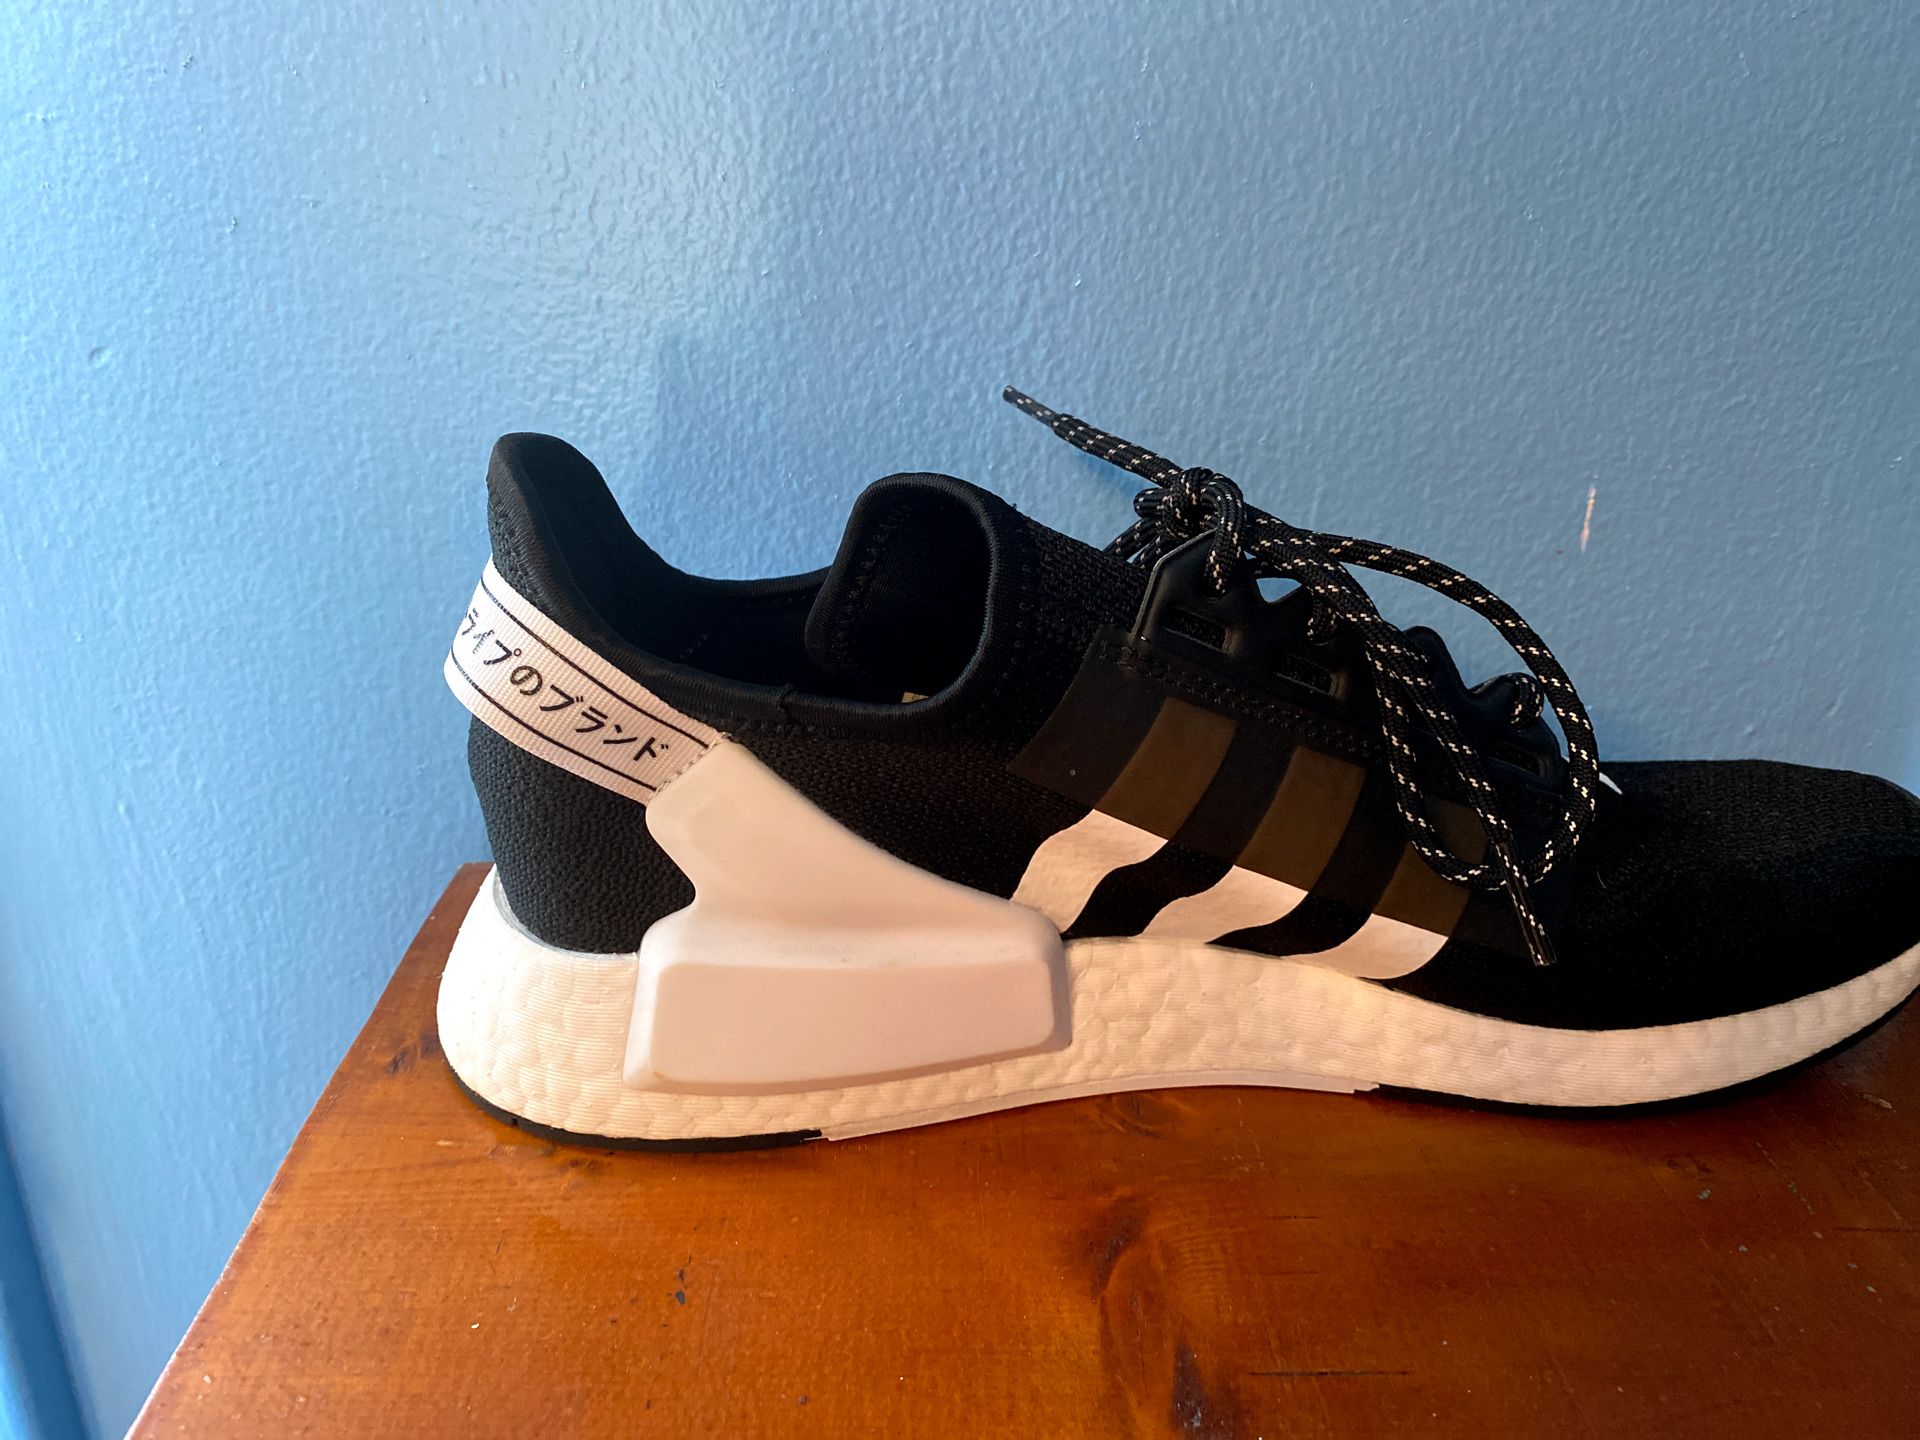 Adidas NMD V2 black and white vary clean used 3 times and comes with box